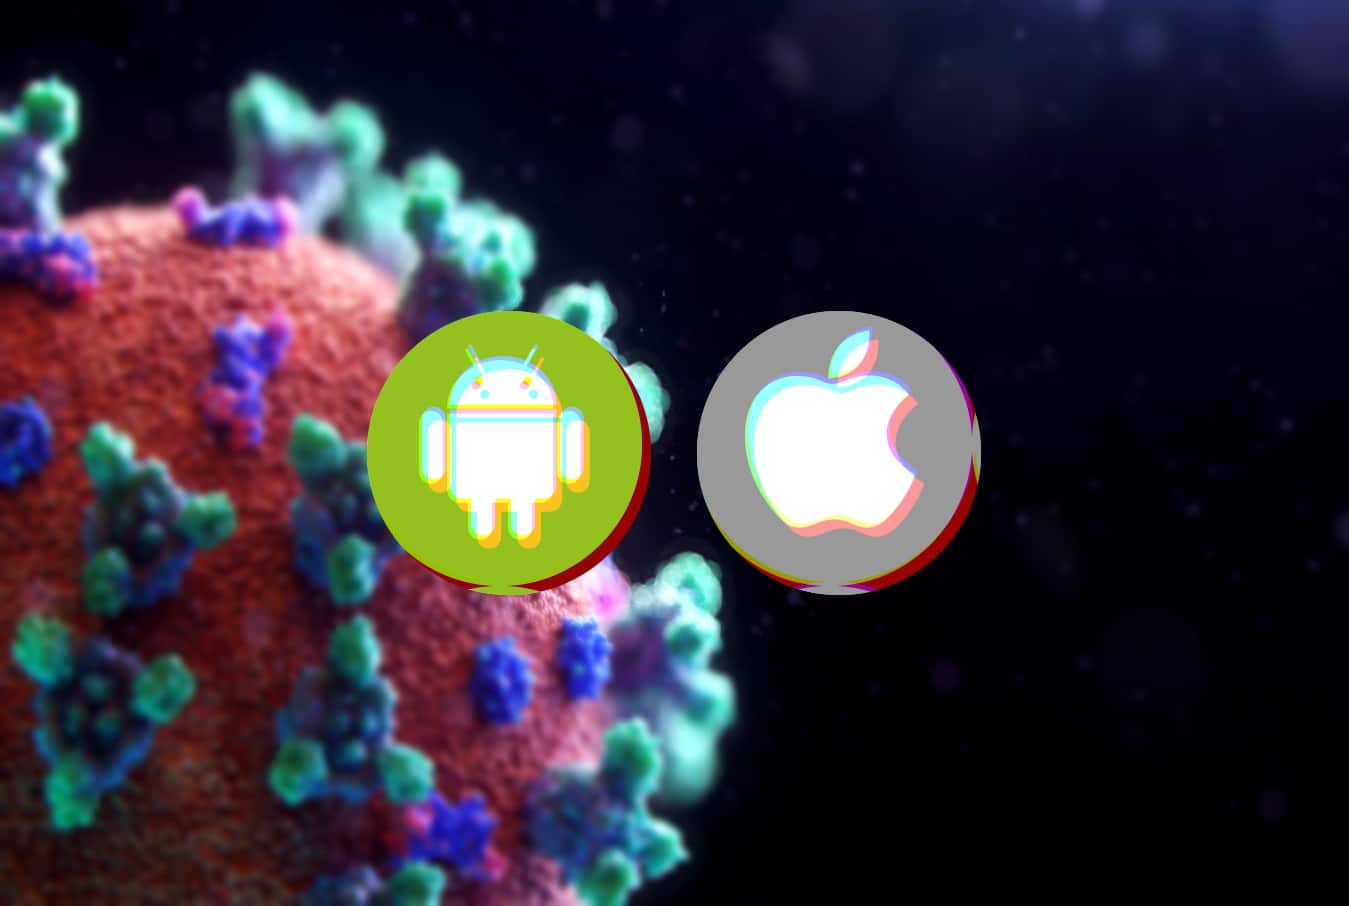 Fake Coronavirus apps hit Android & iOS users with spyware, adware